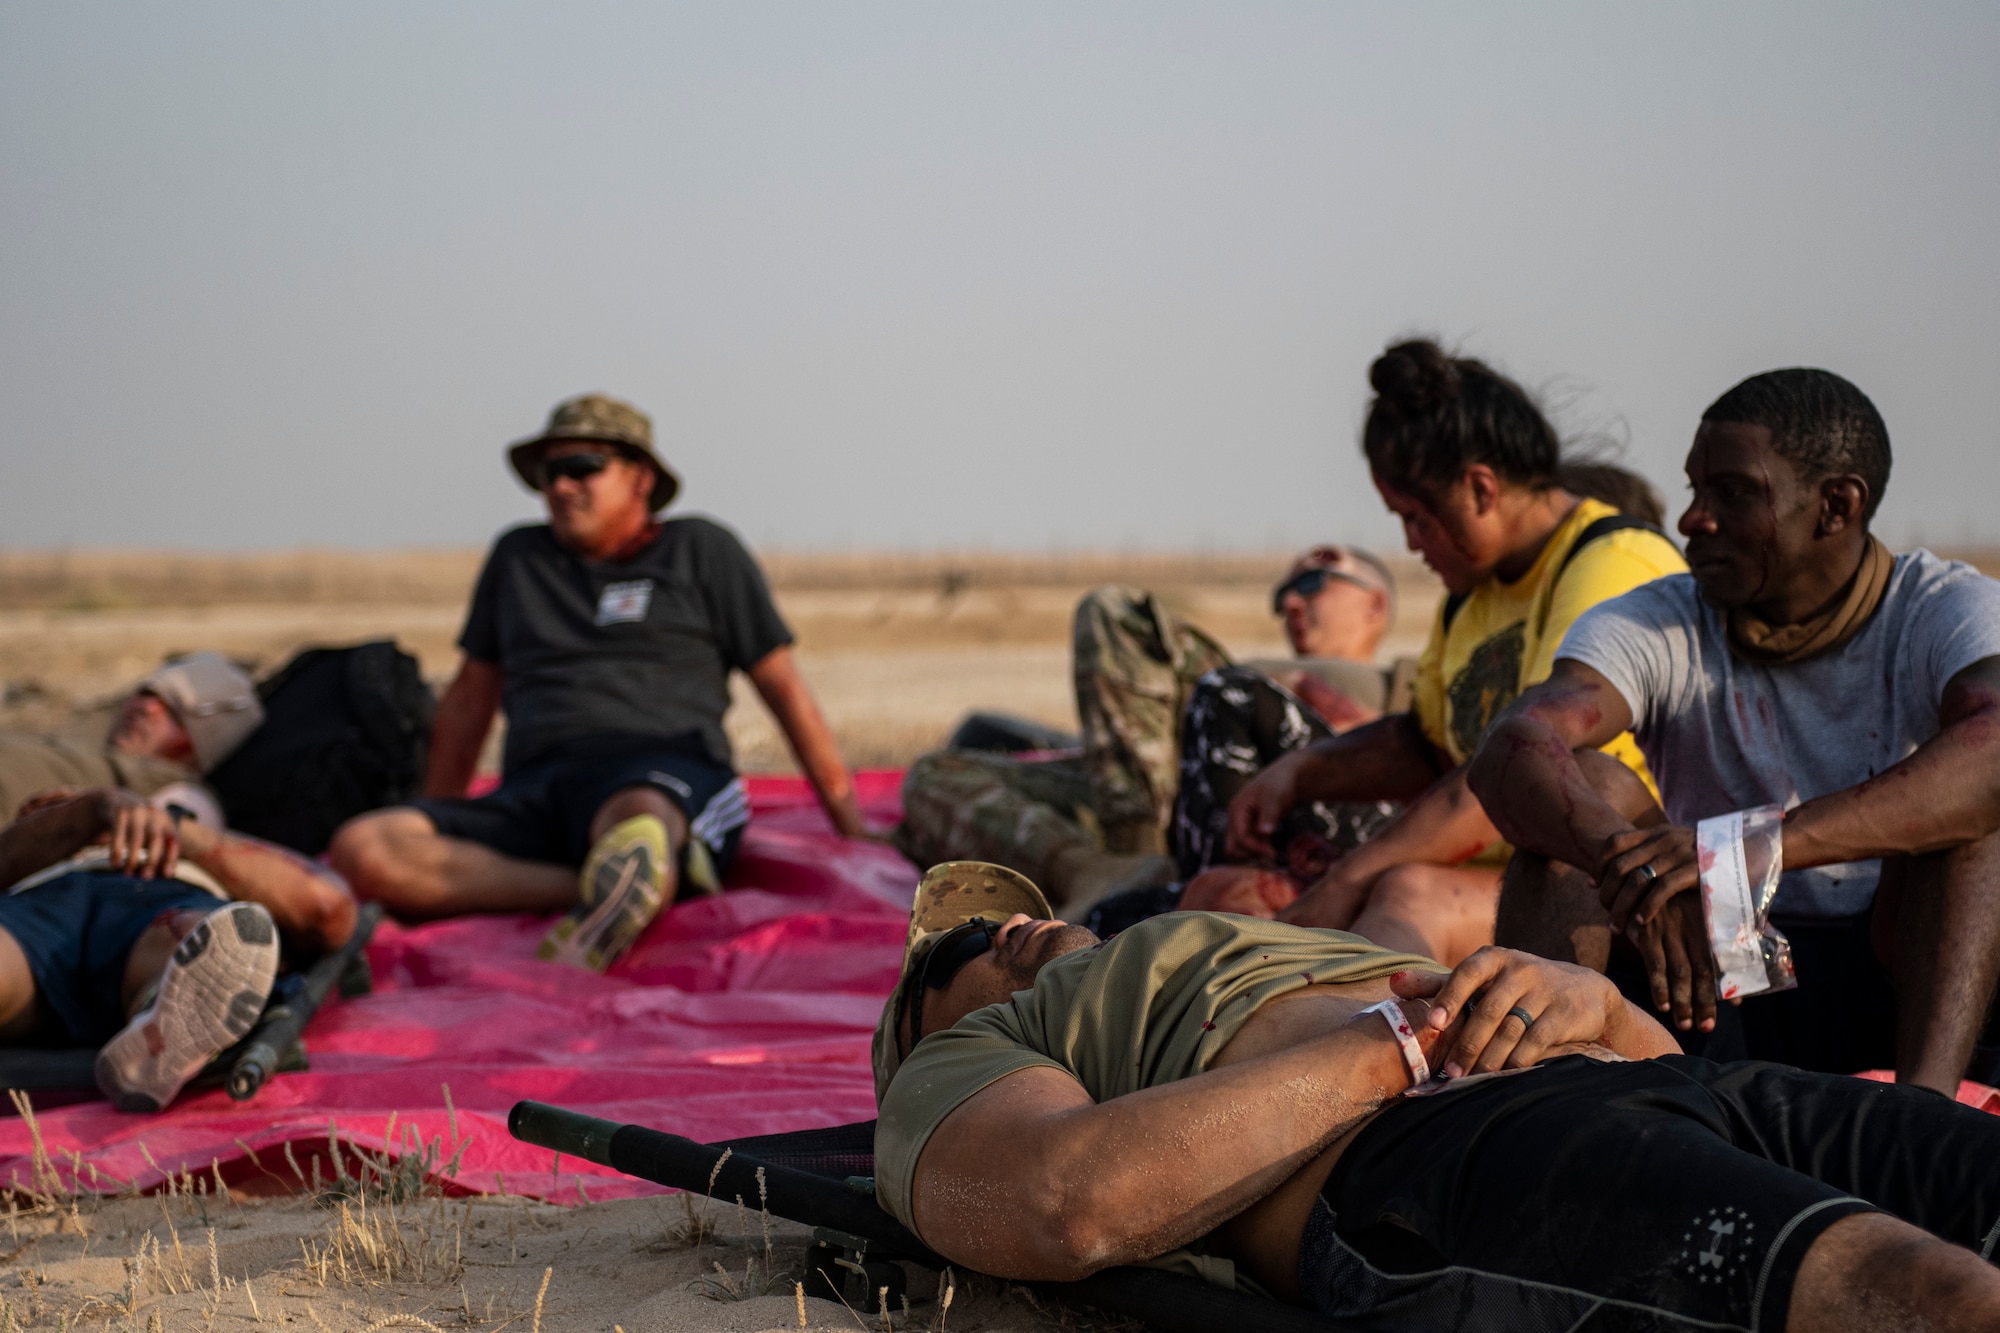 Volunteers acting as casualties with simulated injuries gather in the desert.